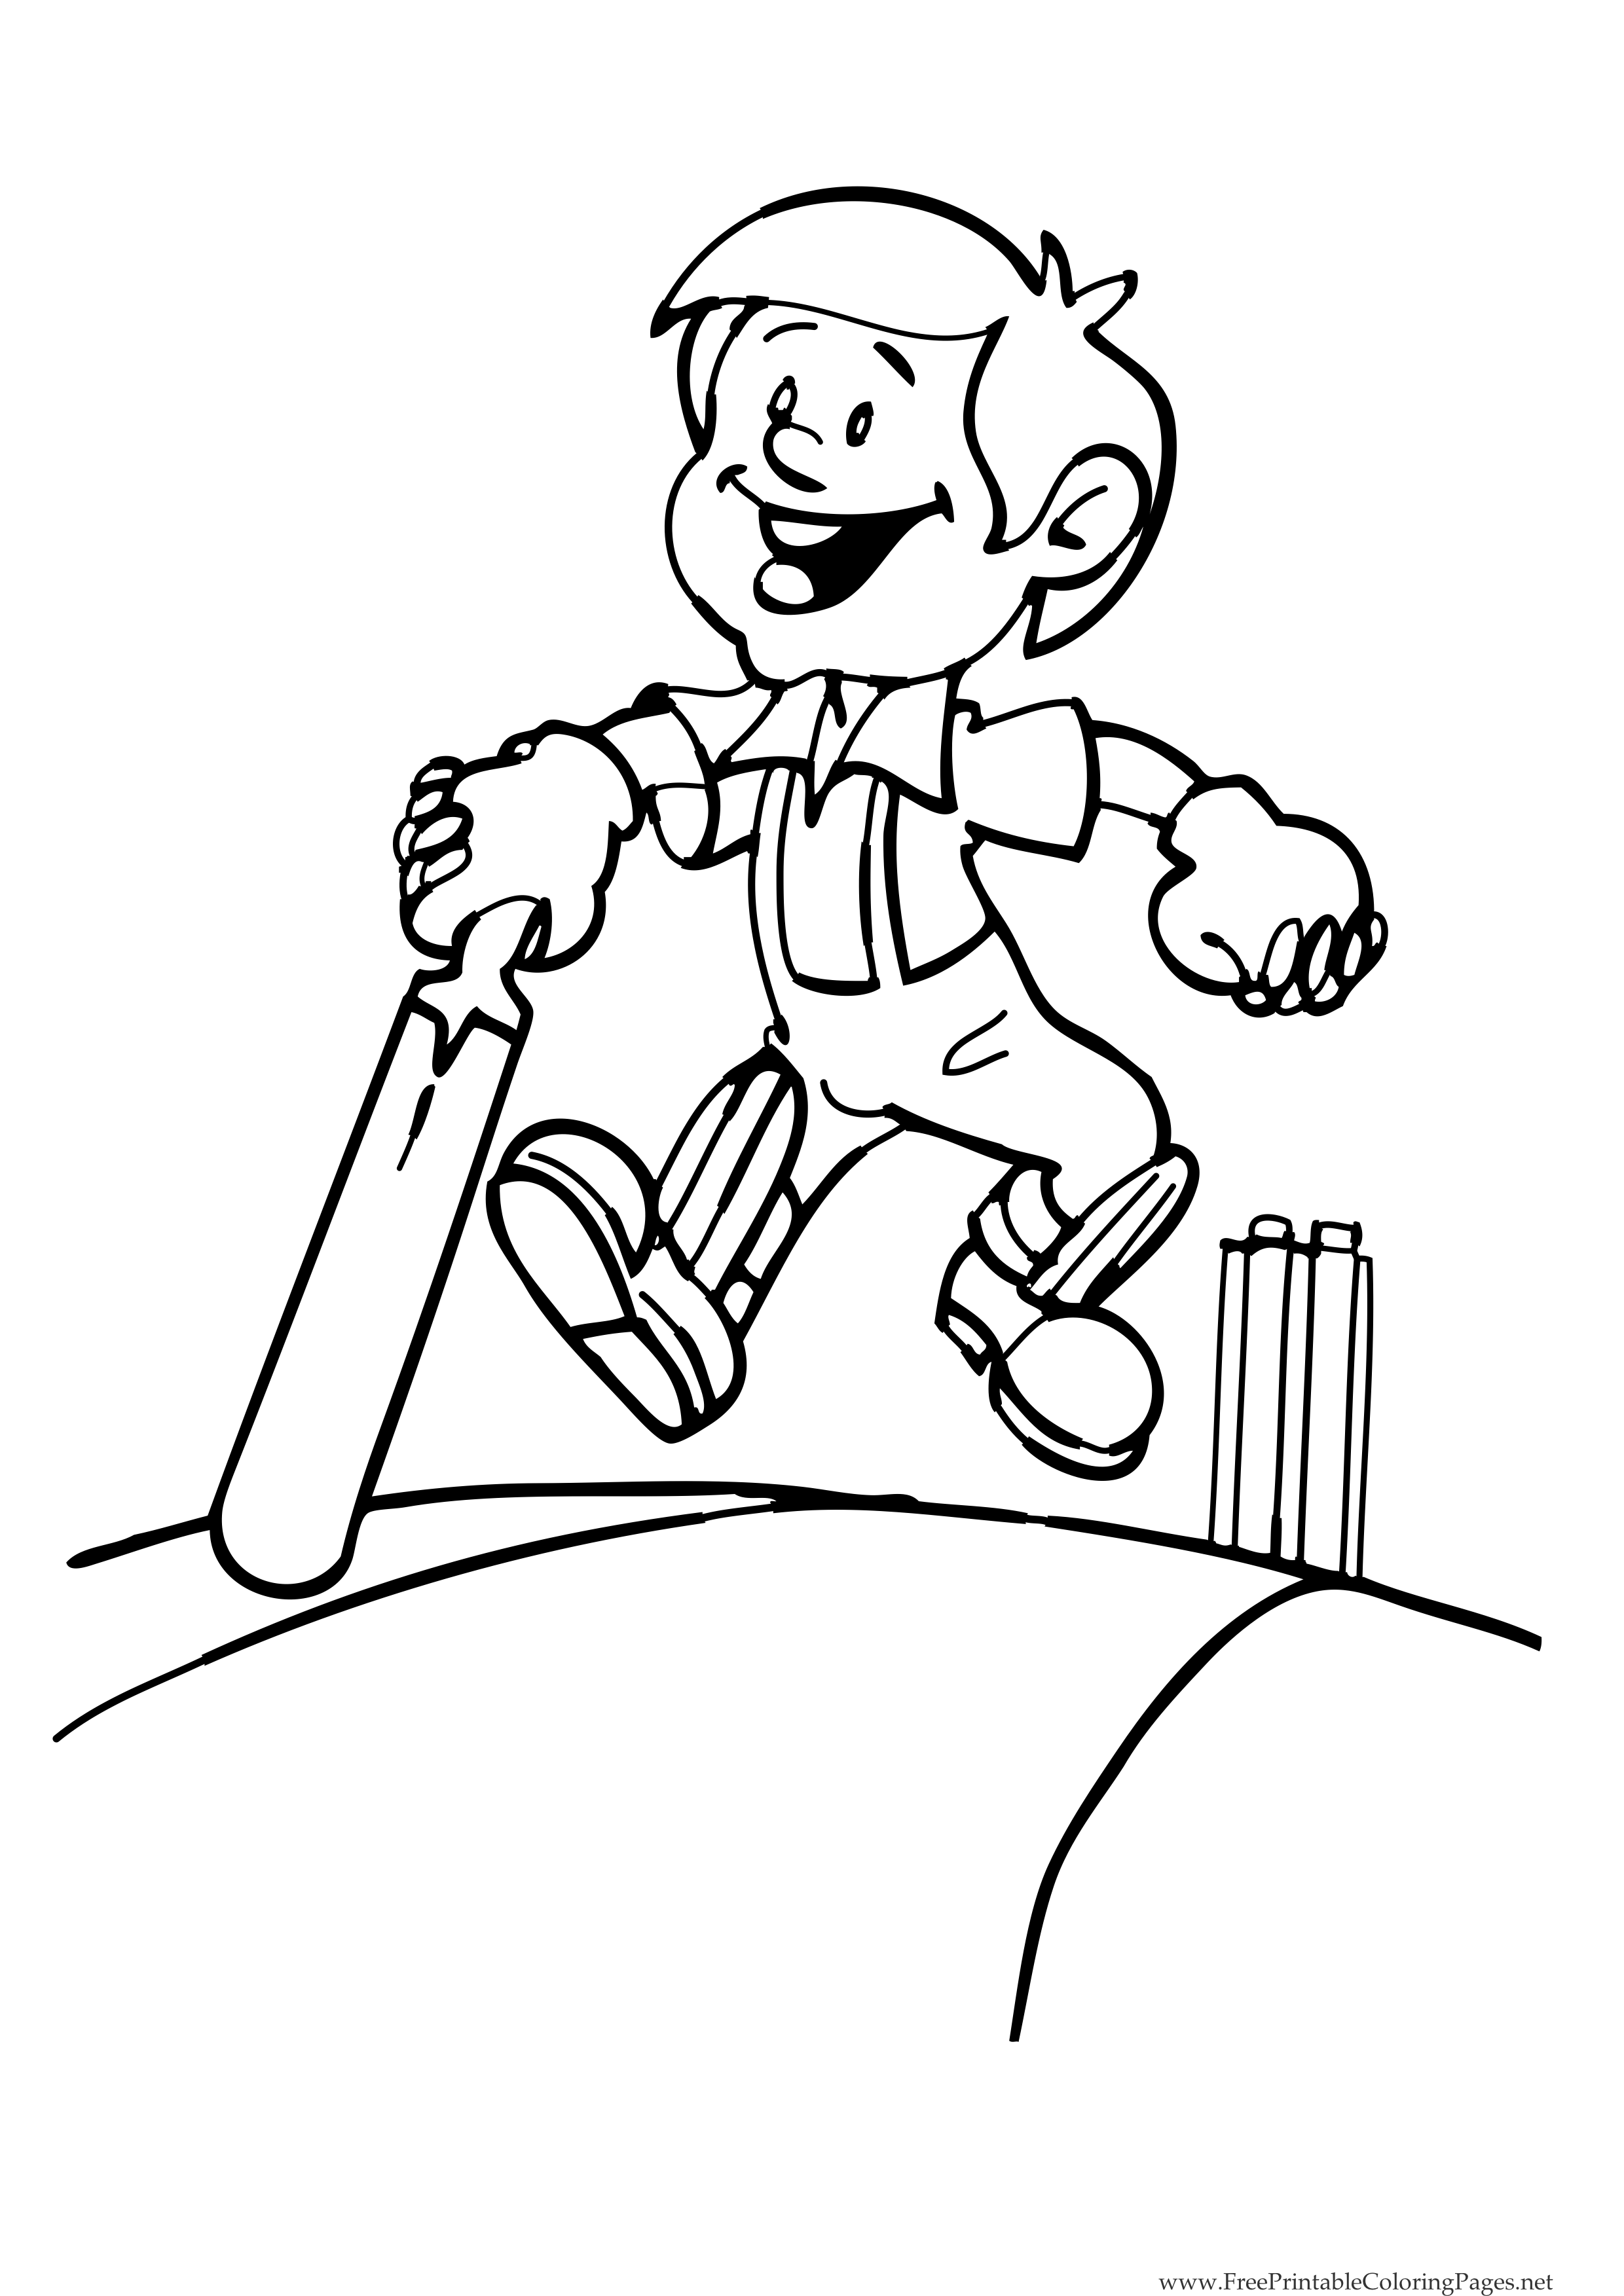 cricket printable coloring pages